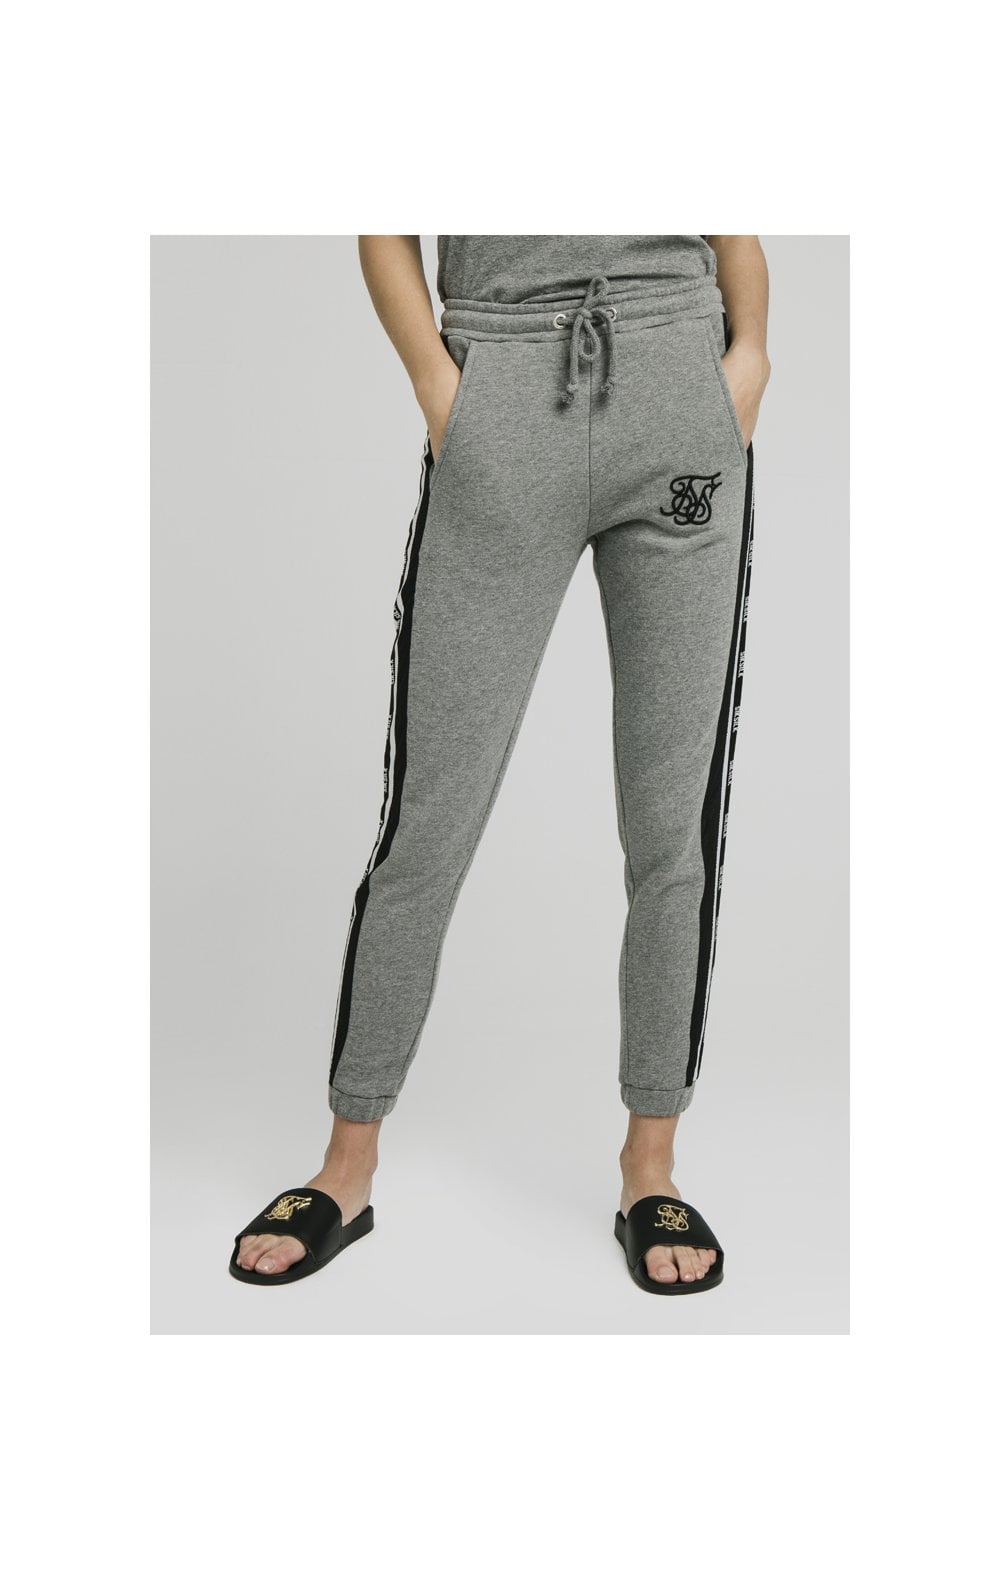 Load image into Gallery viewer, SikSilk Panel Tape Joggers - Grey Marl (2)